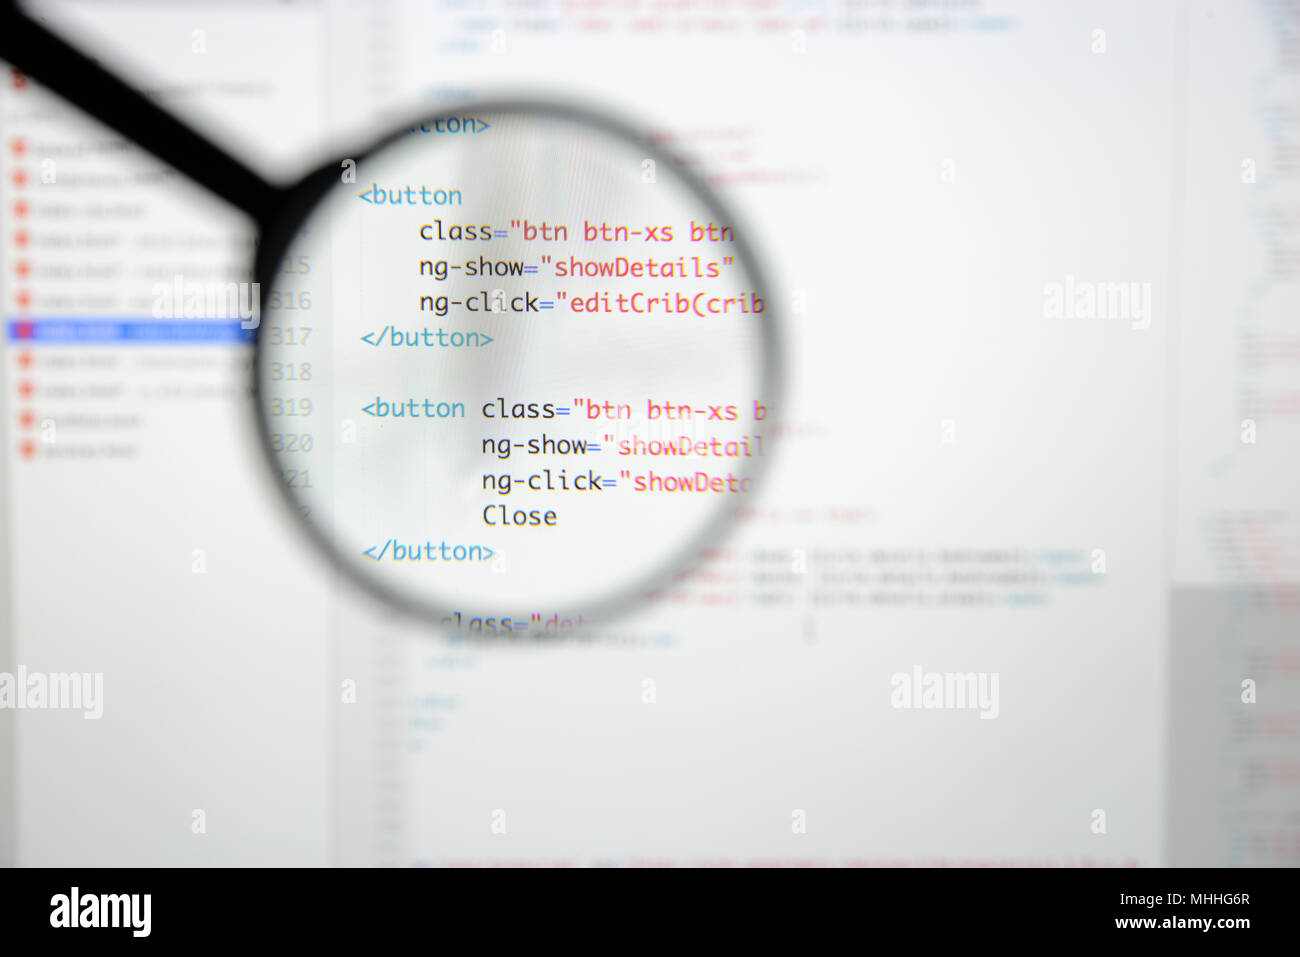 Real Html code developing screen. Programing workflow abstract algorithm concept. Lines of Html code visible under magnifying lens. Stock Photo